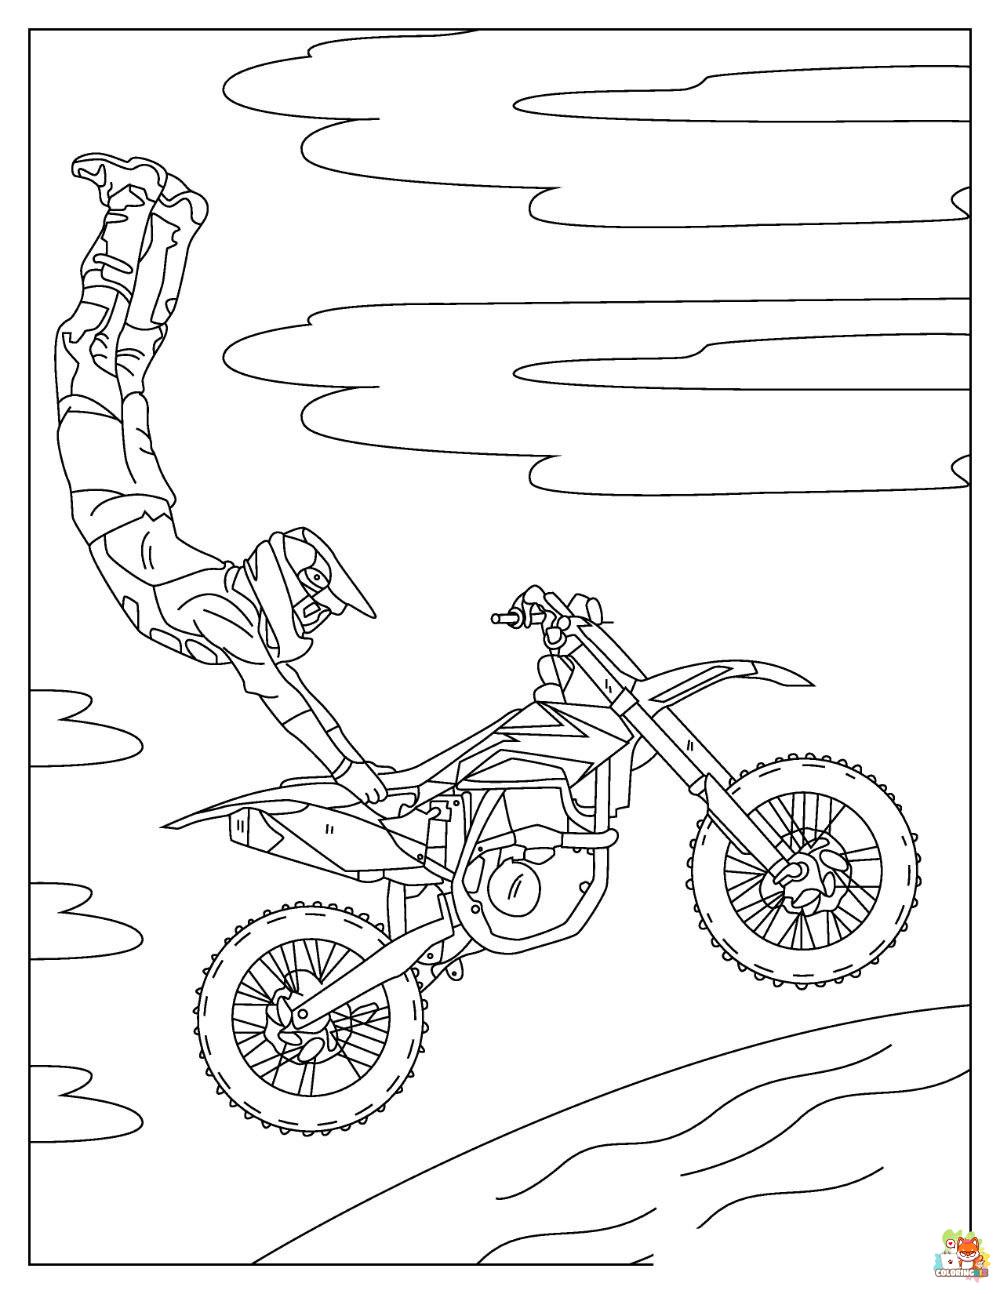 dirt bike coloring pages 1